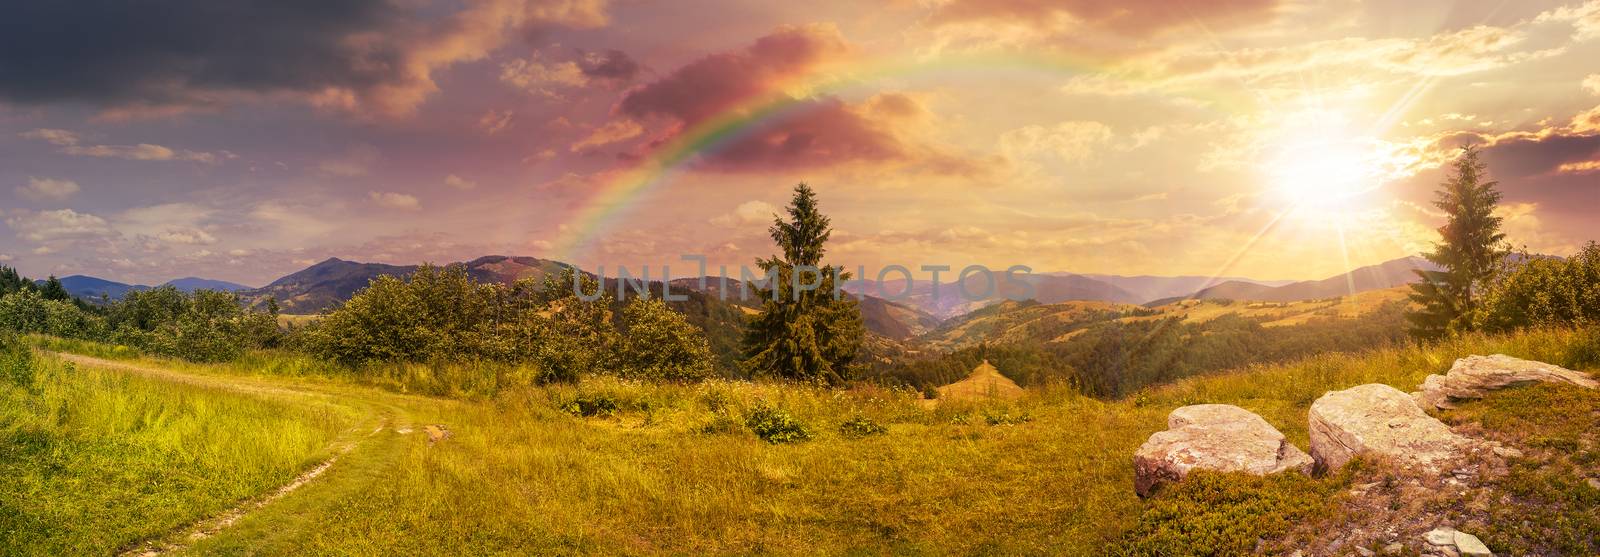 boulders on hillside meadow in mountain at sunset with rainbow by Pellinni